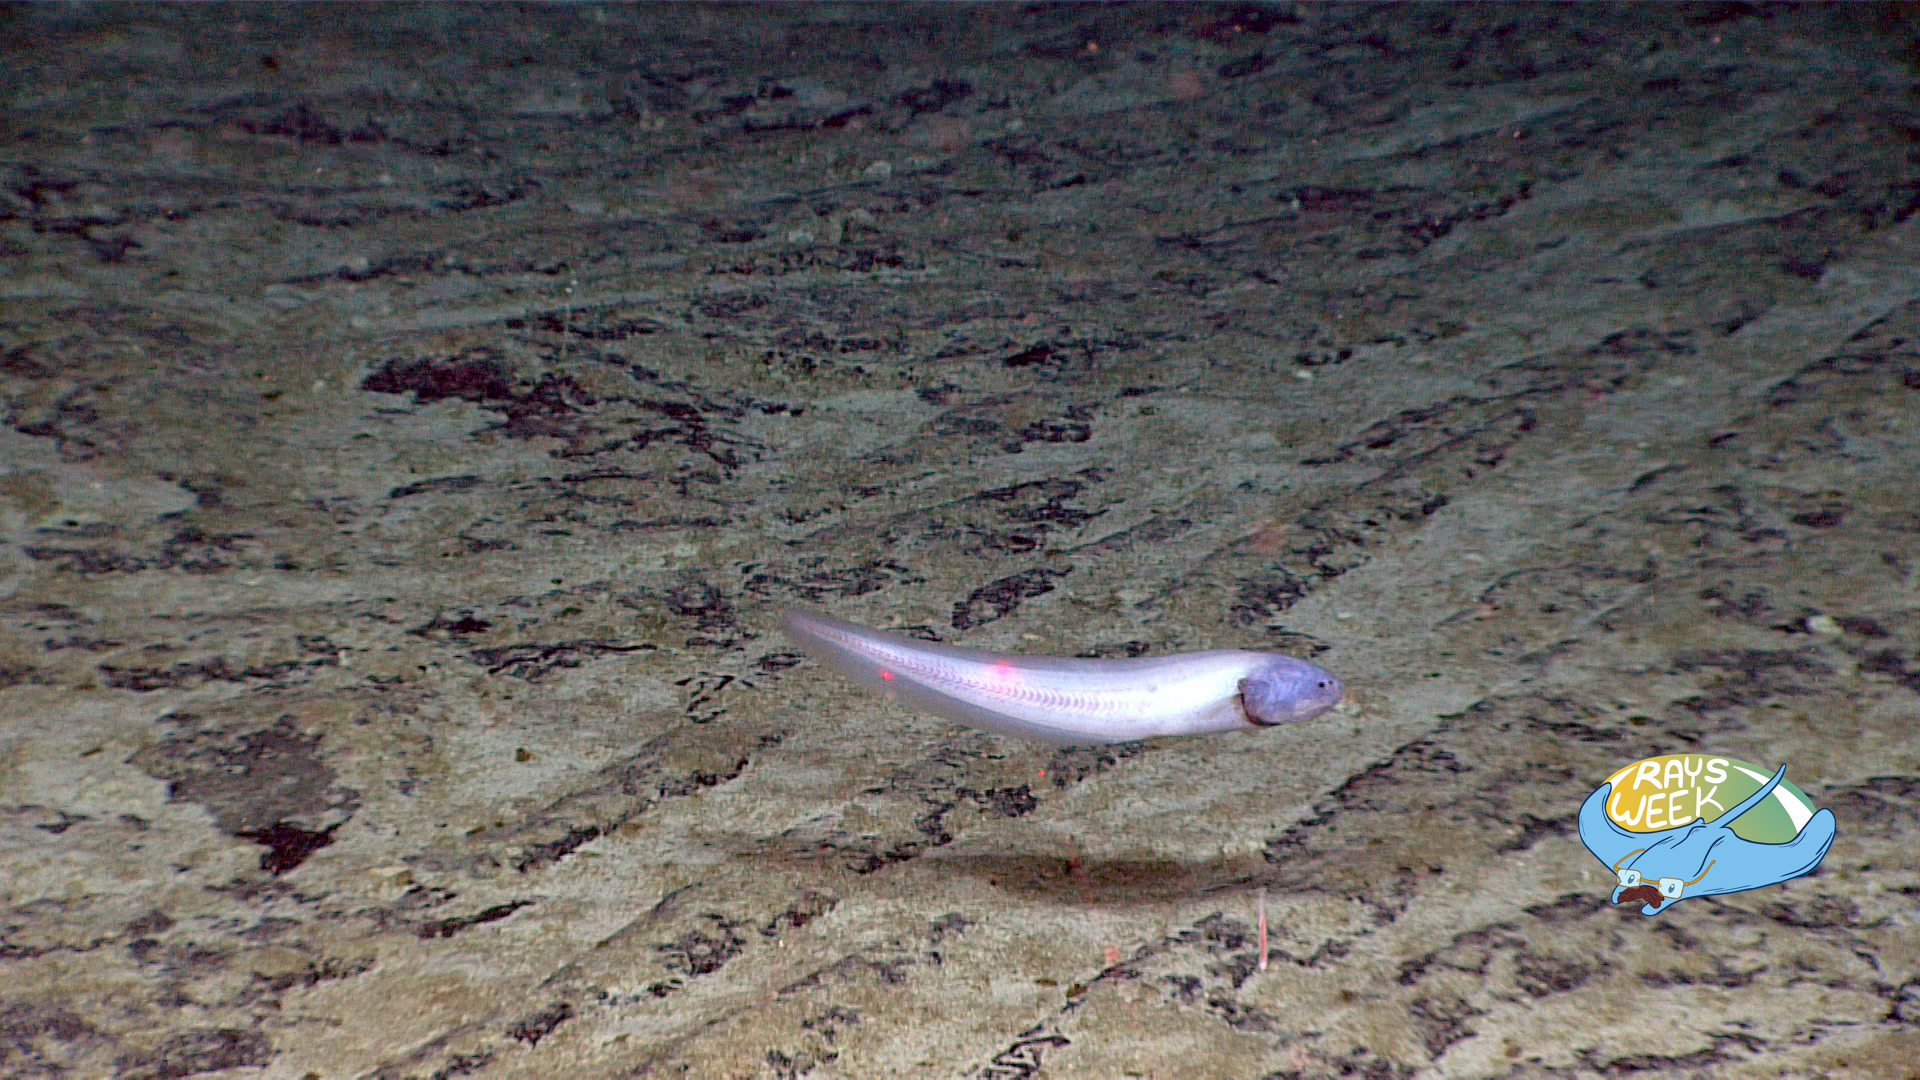 A deep-sea cusk eek in the family Bassozetus glimpsed in the Central Pacific Basin.